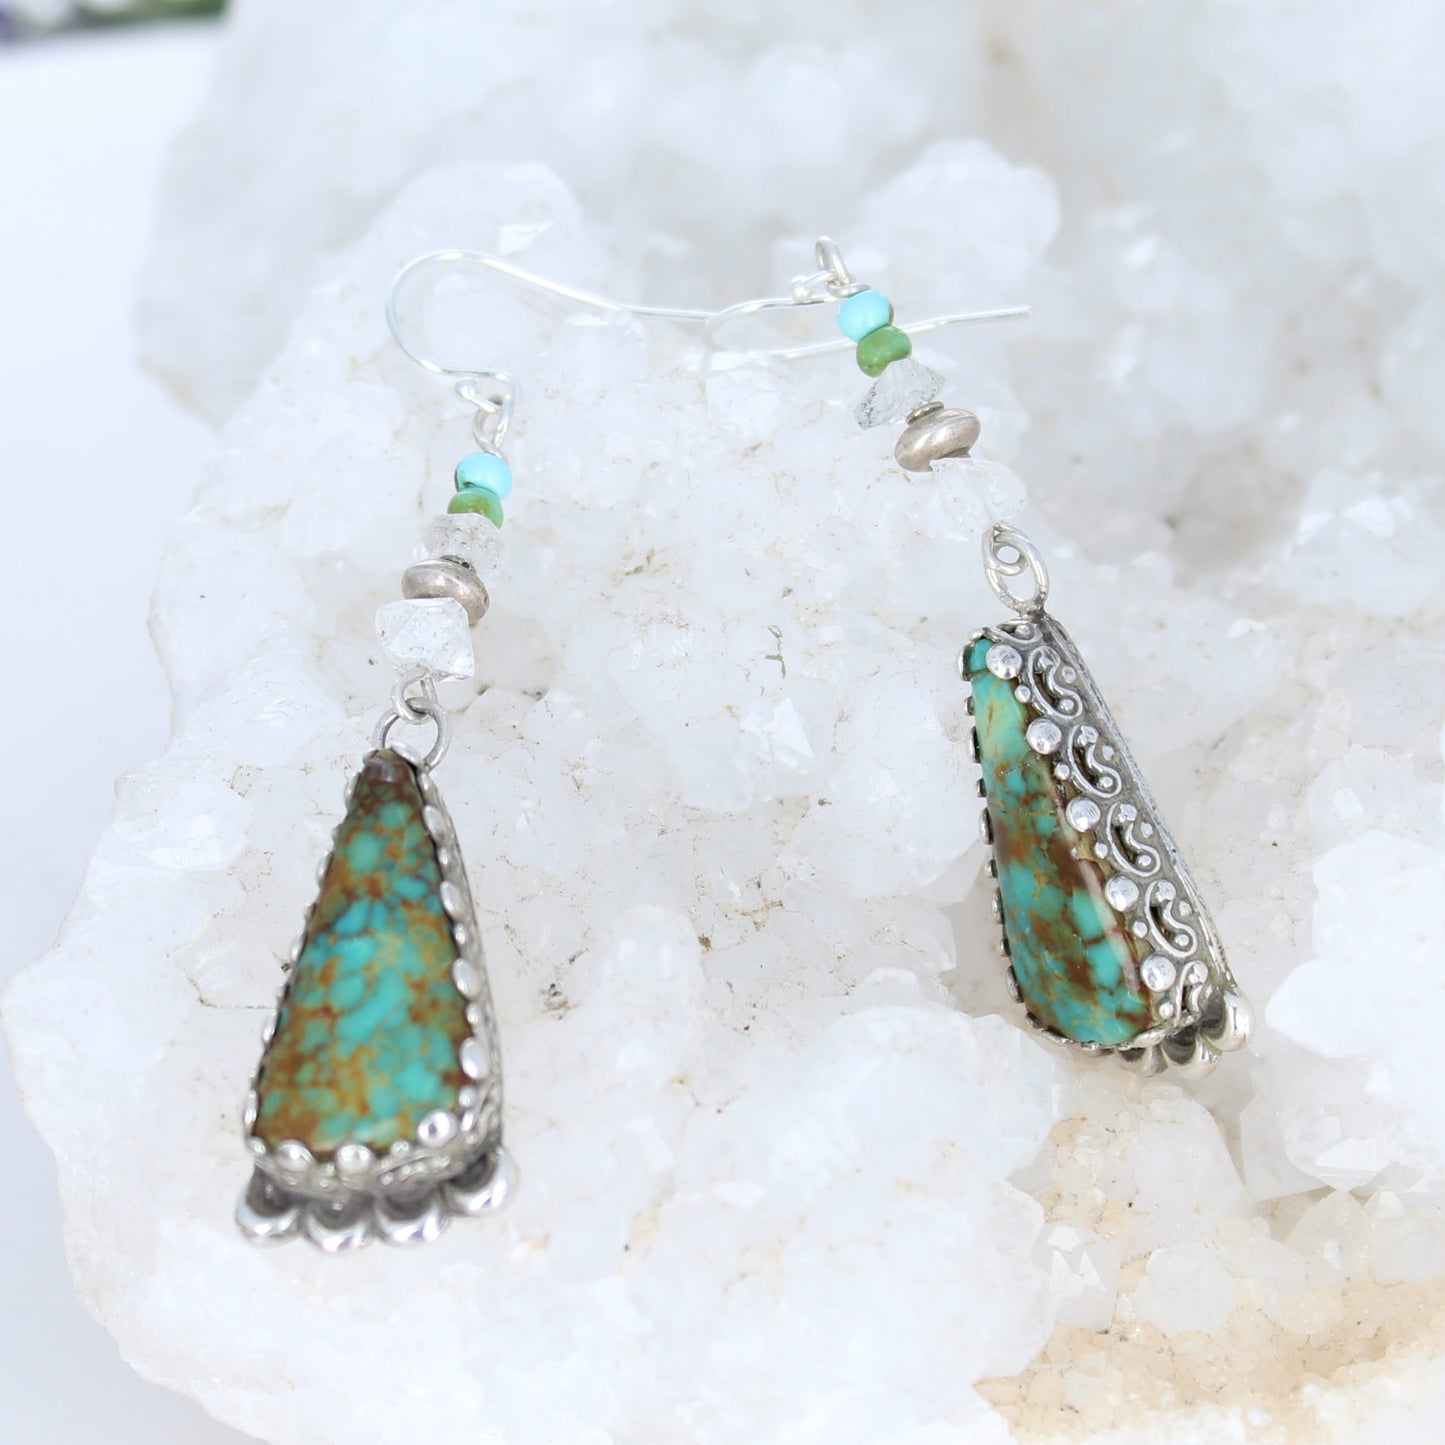 Forest Royston Turquoise Earrings Moons with Sparkling Herkimer Diamonds Sterling